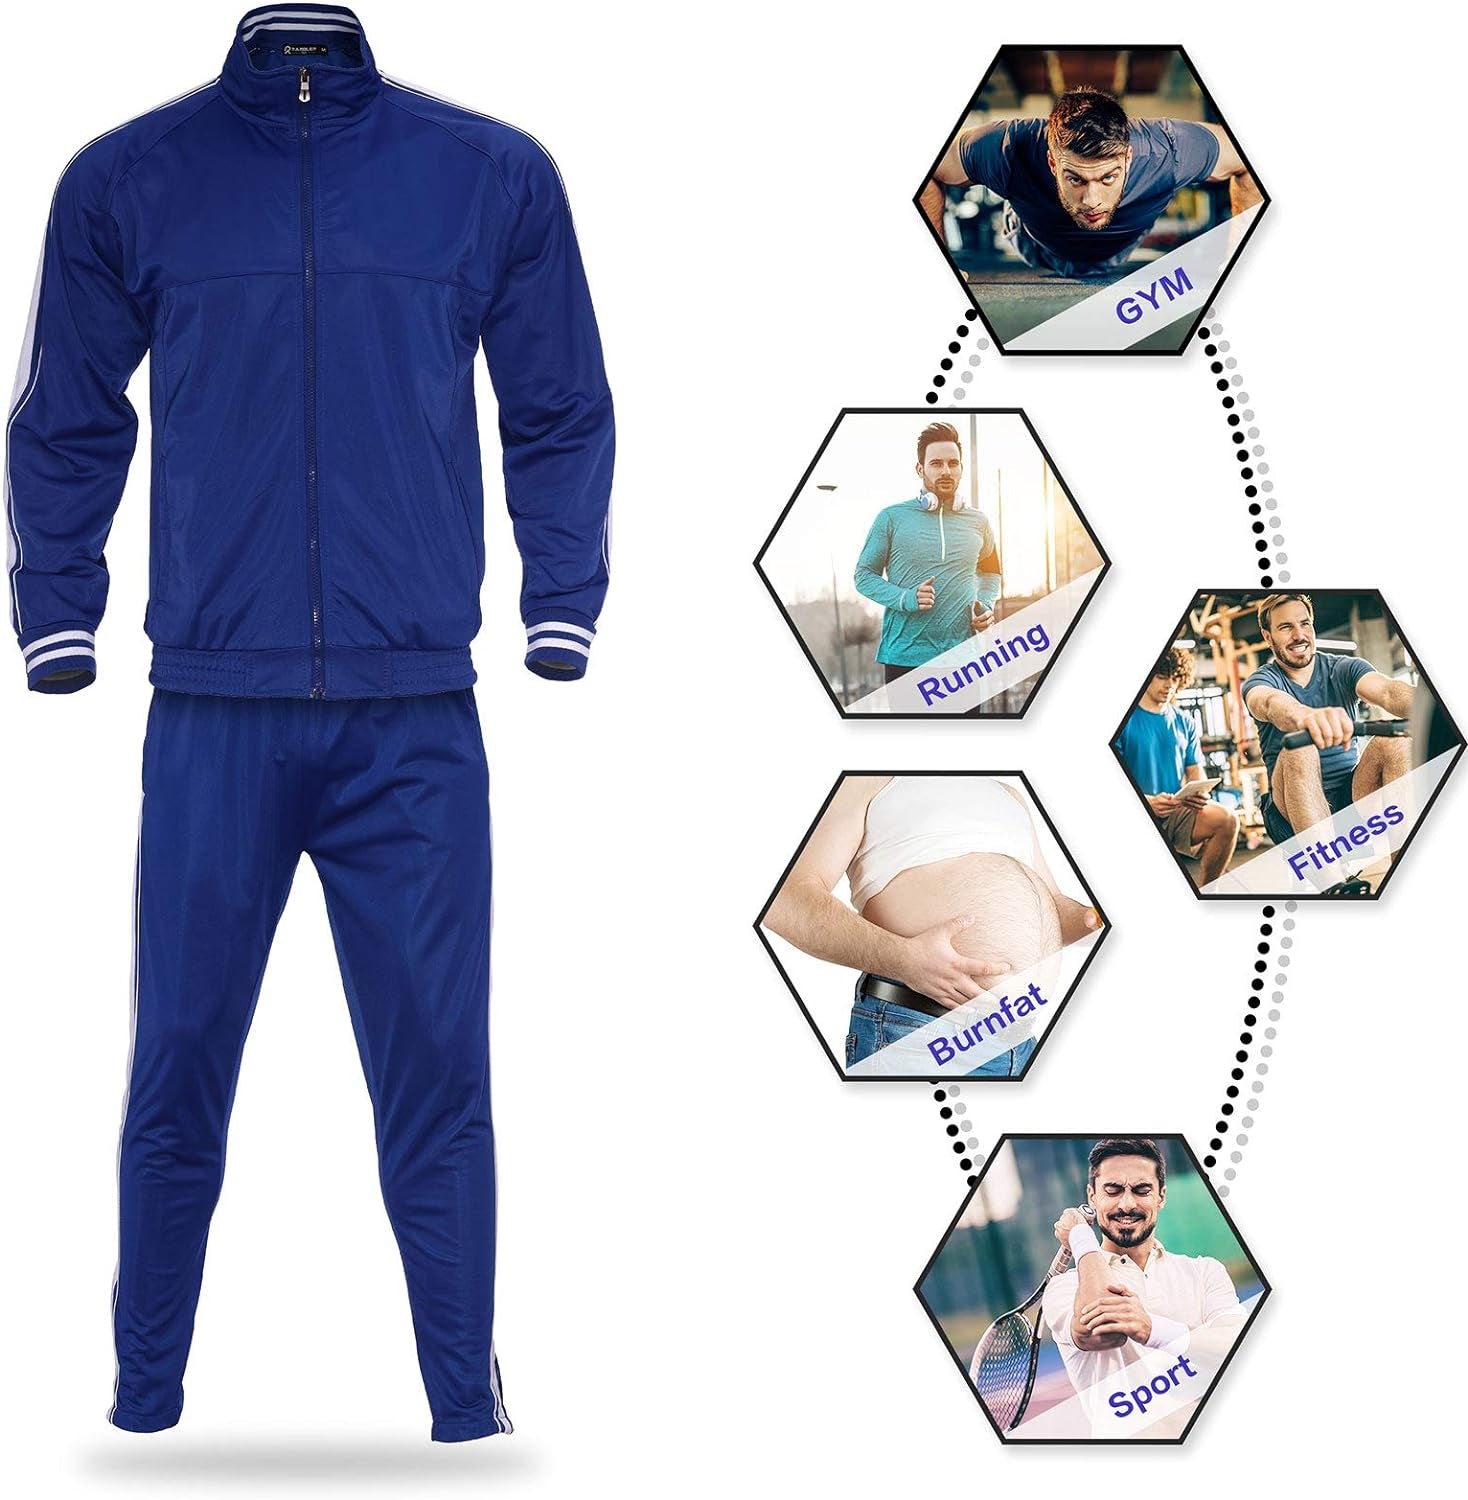 Mens Sweatsuits 2 Piece Casual Athletic Long Sleeve Tracksuit Set Jogging Suit for Running,Exercise,Traning